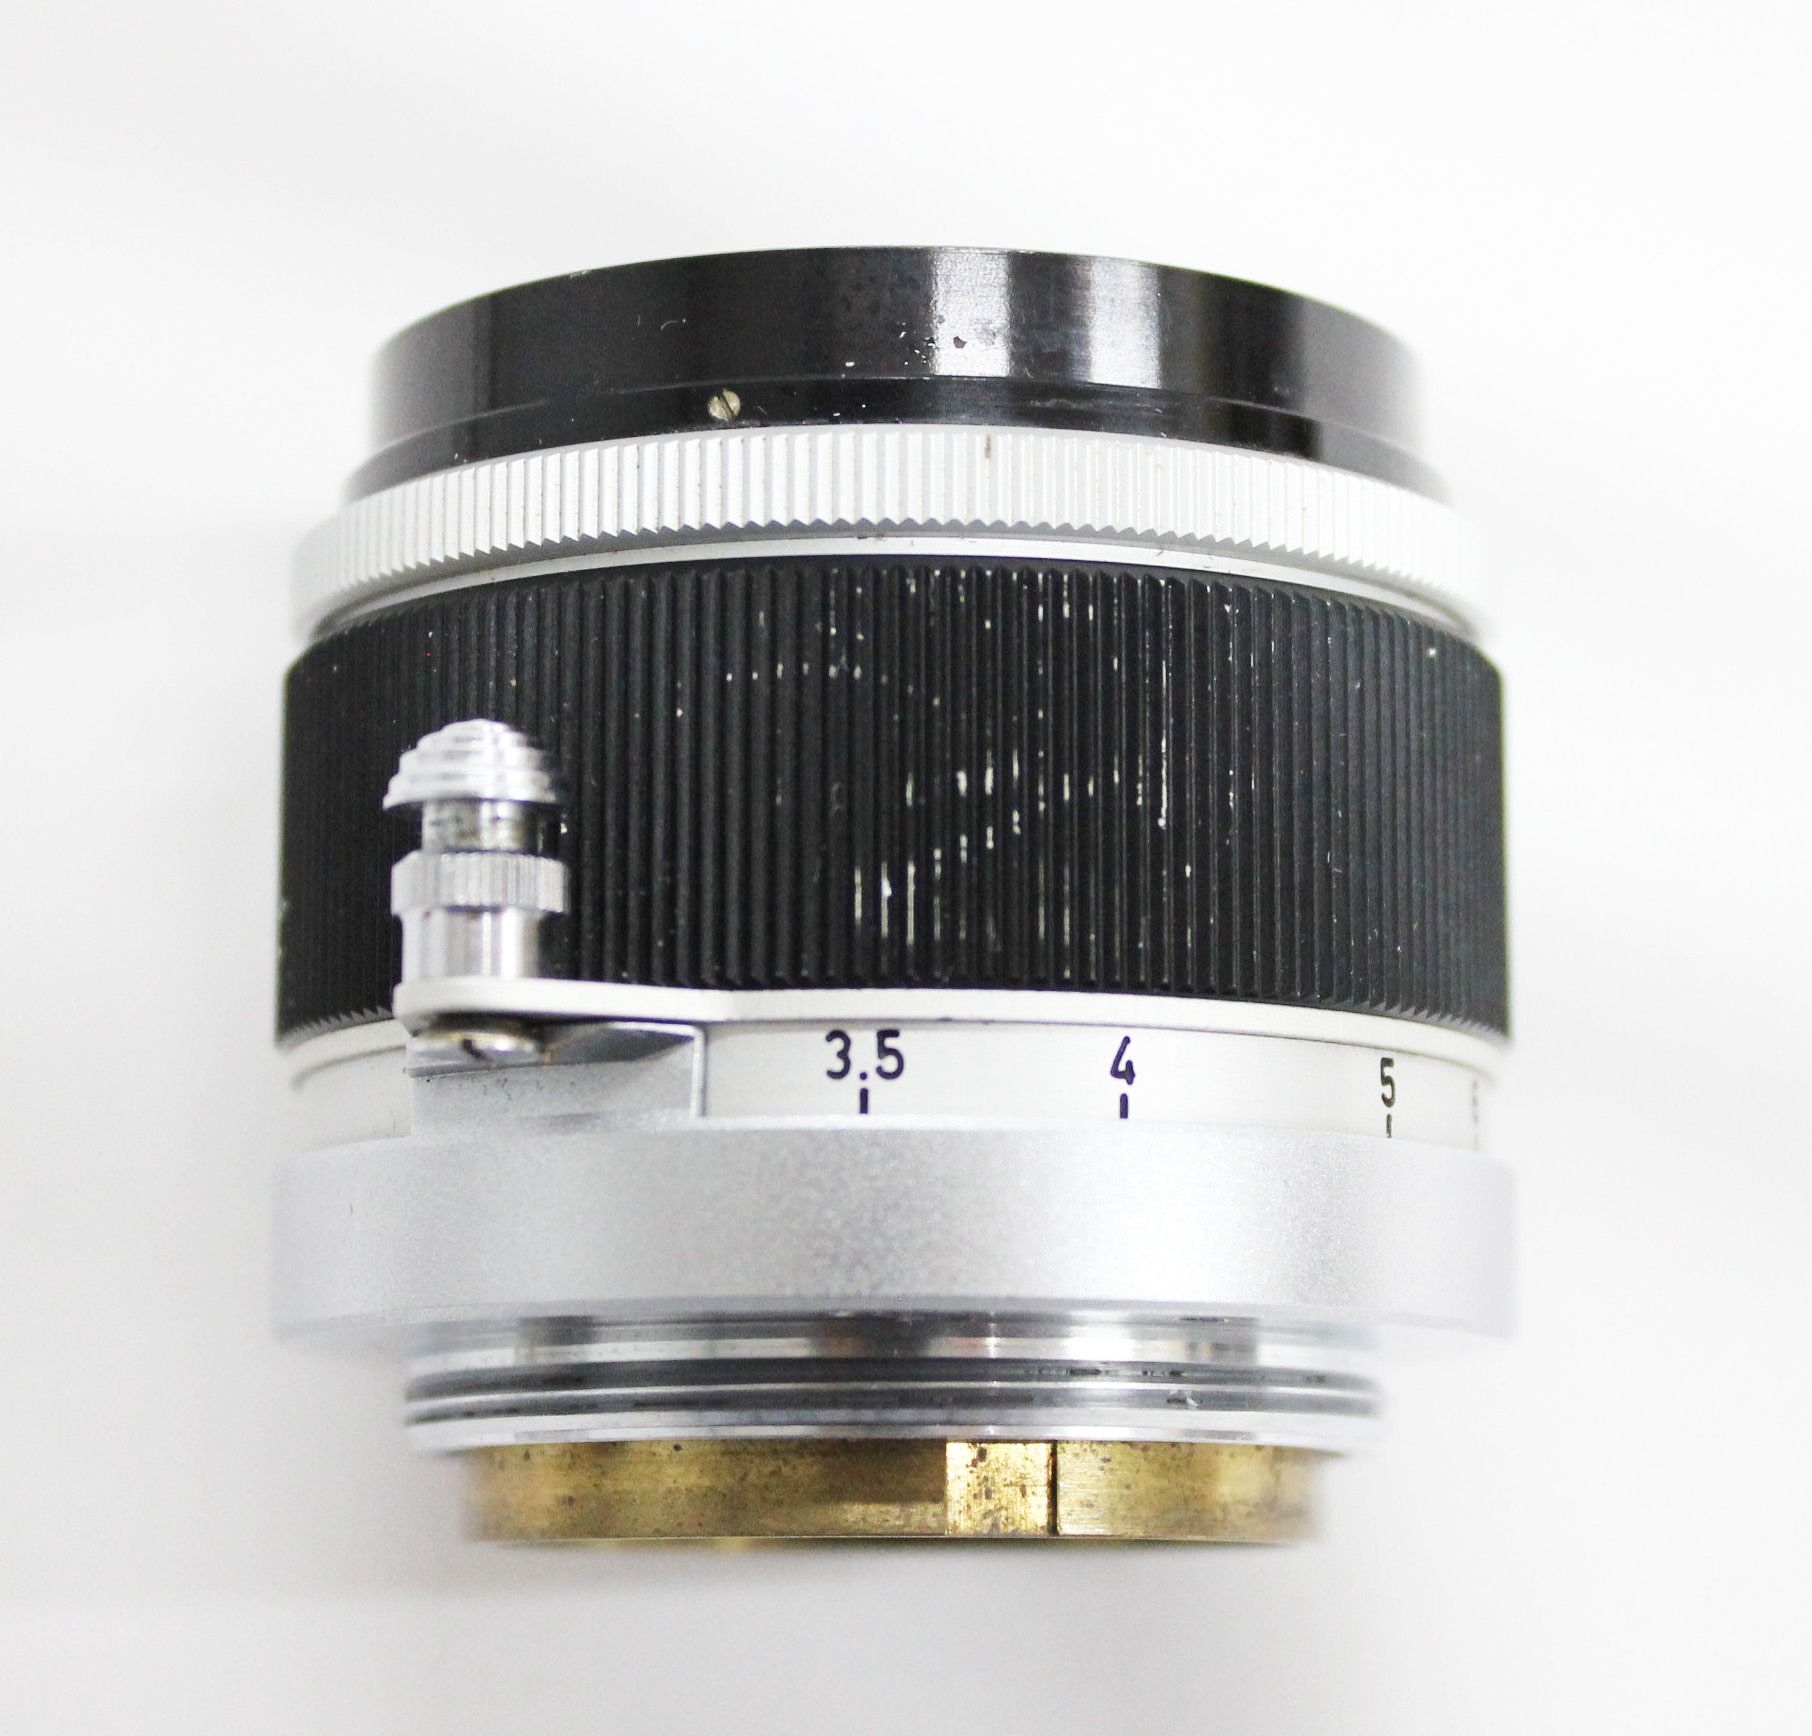  Canon 50mm F/1.8 Leica L39 Screw Mount Lens from Japan Photo 5